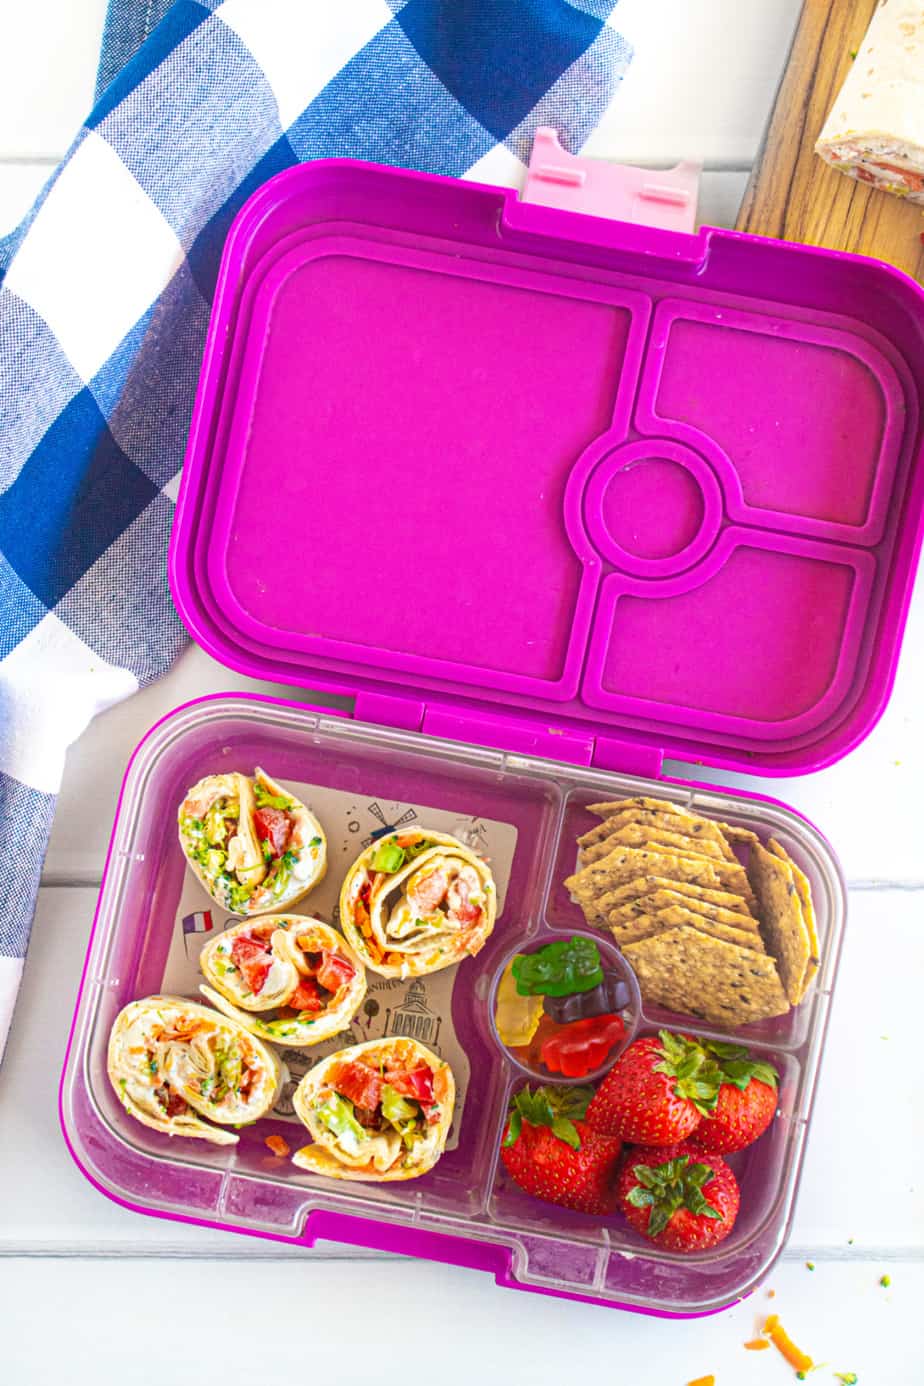 A child's lunchbox full of vegetable cheese pinwheels, strawberries, crackers and gummy bears.